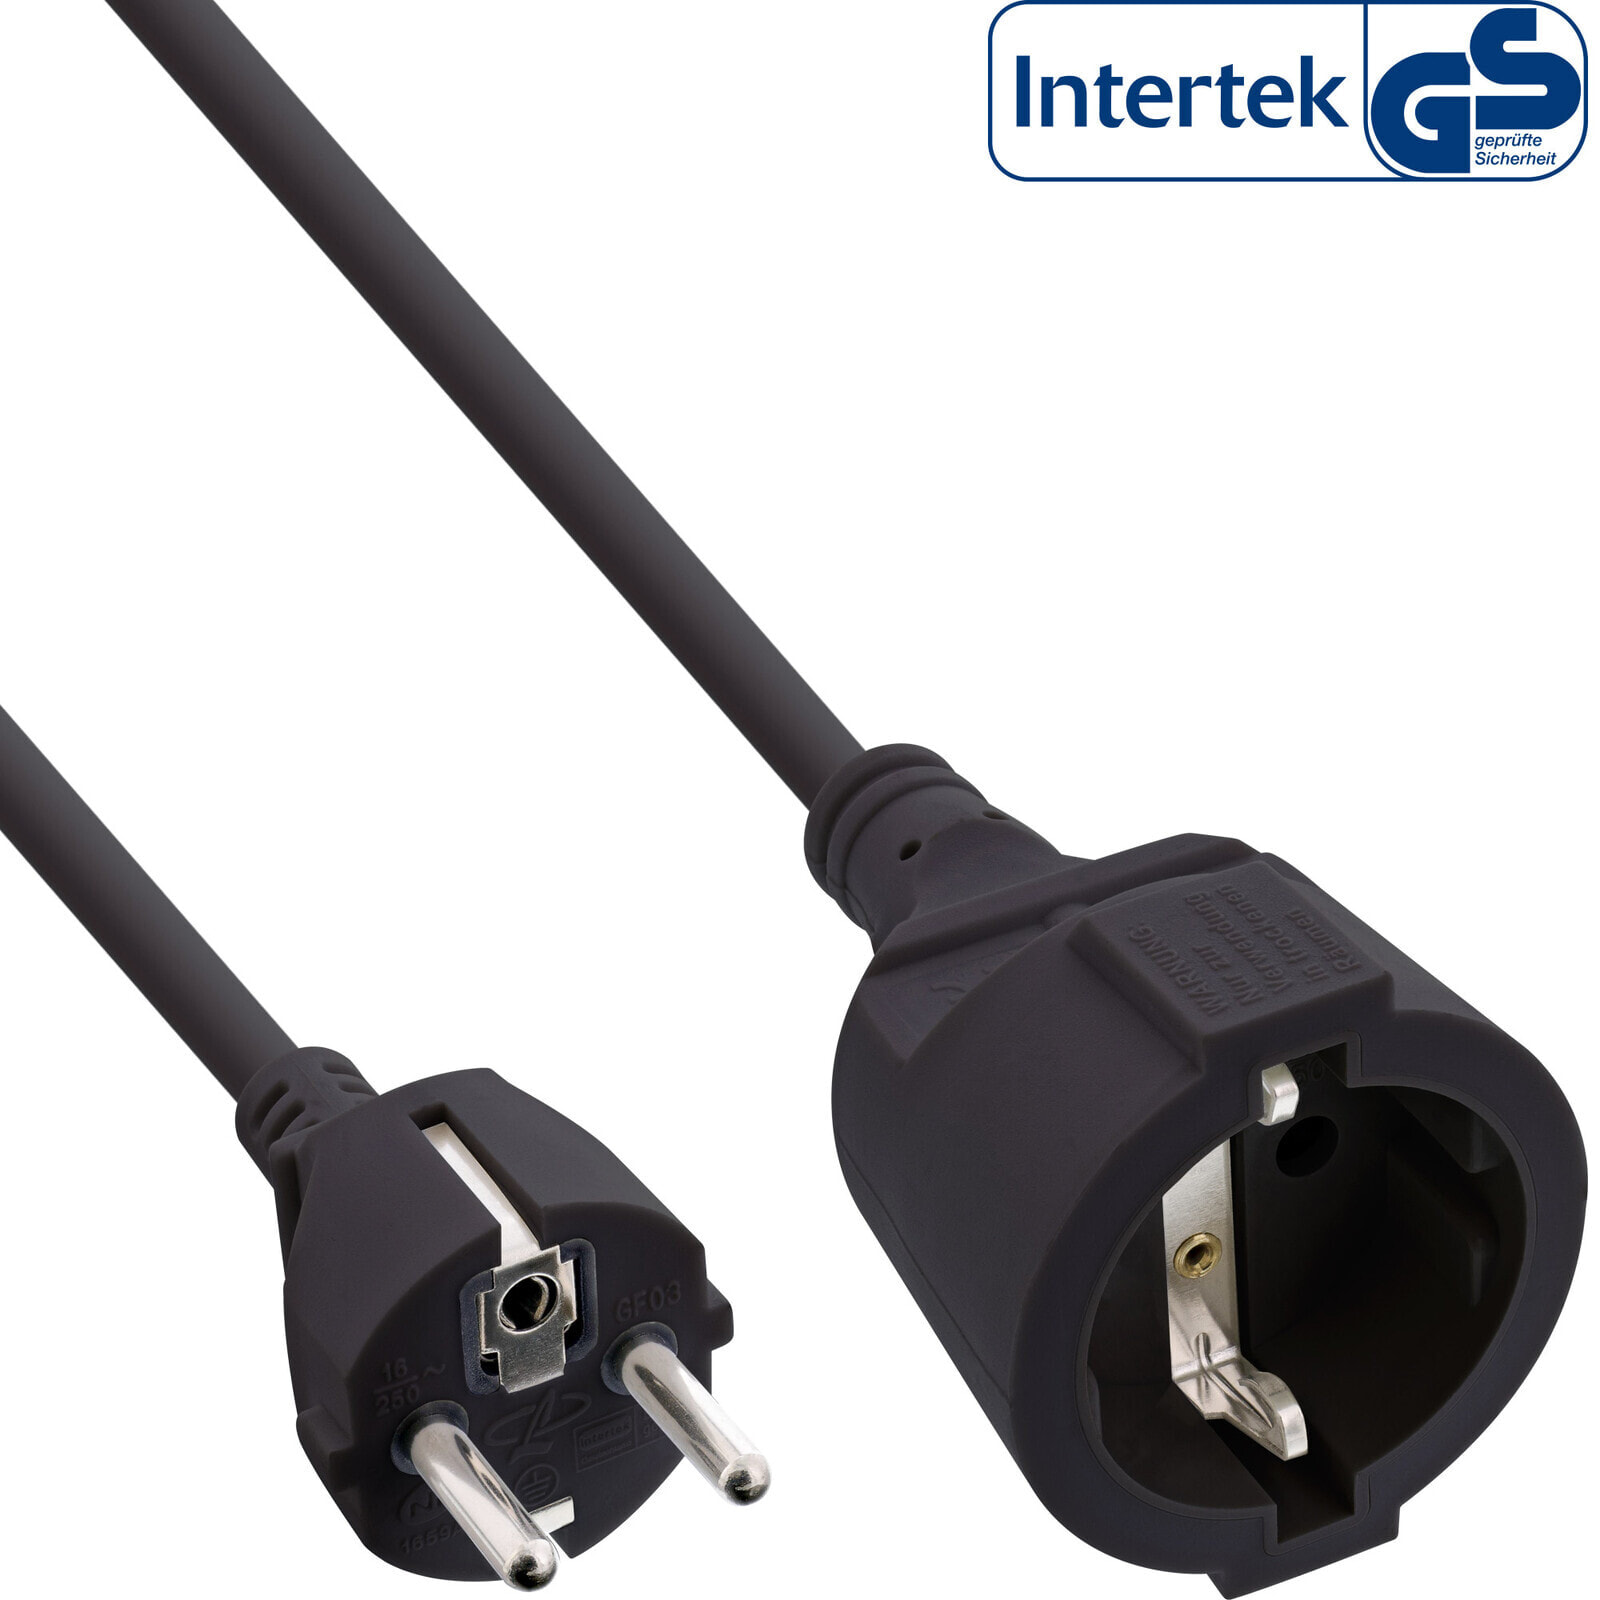 Power extension cable - black - 20m - with child safety